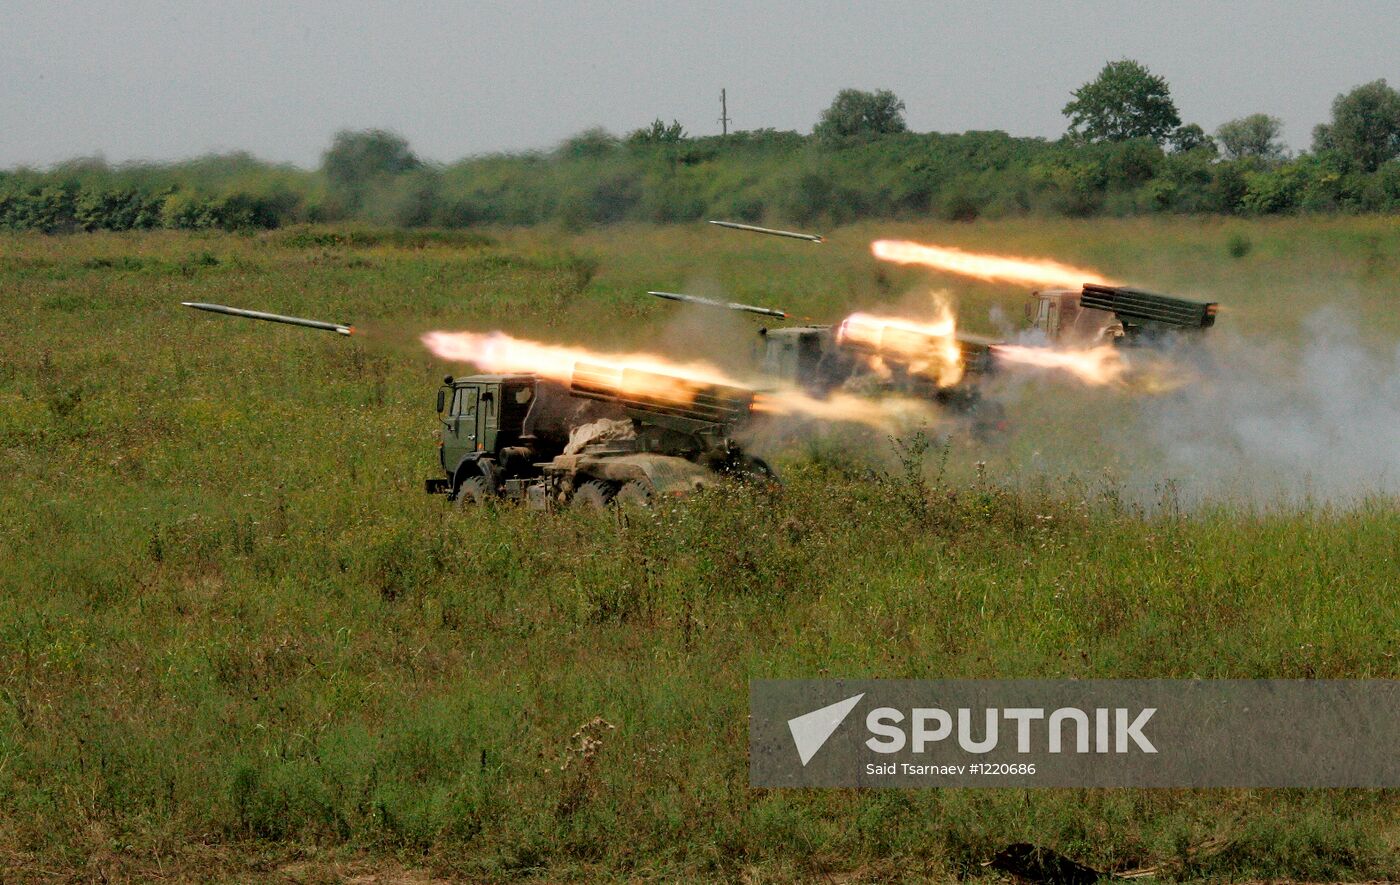 Exercises by land forces artillery batteries in Chechnya